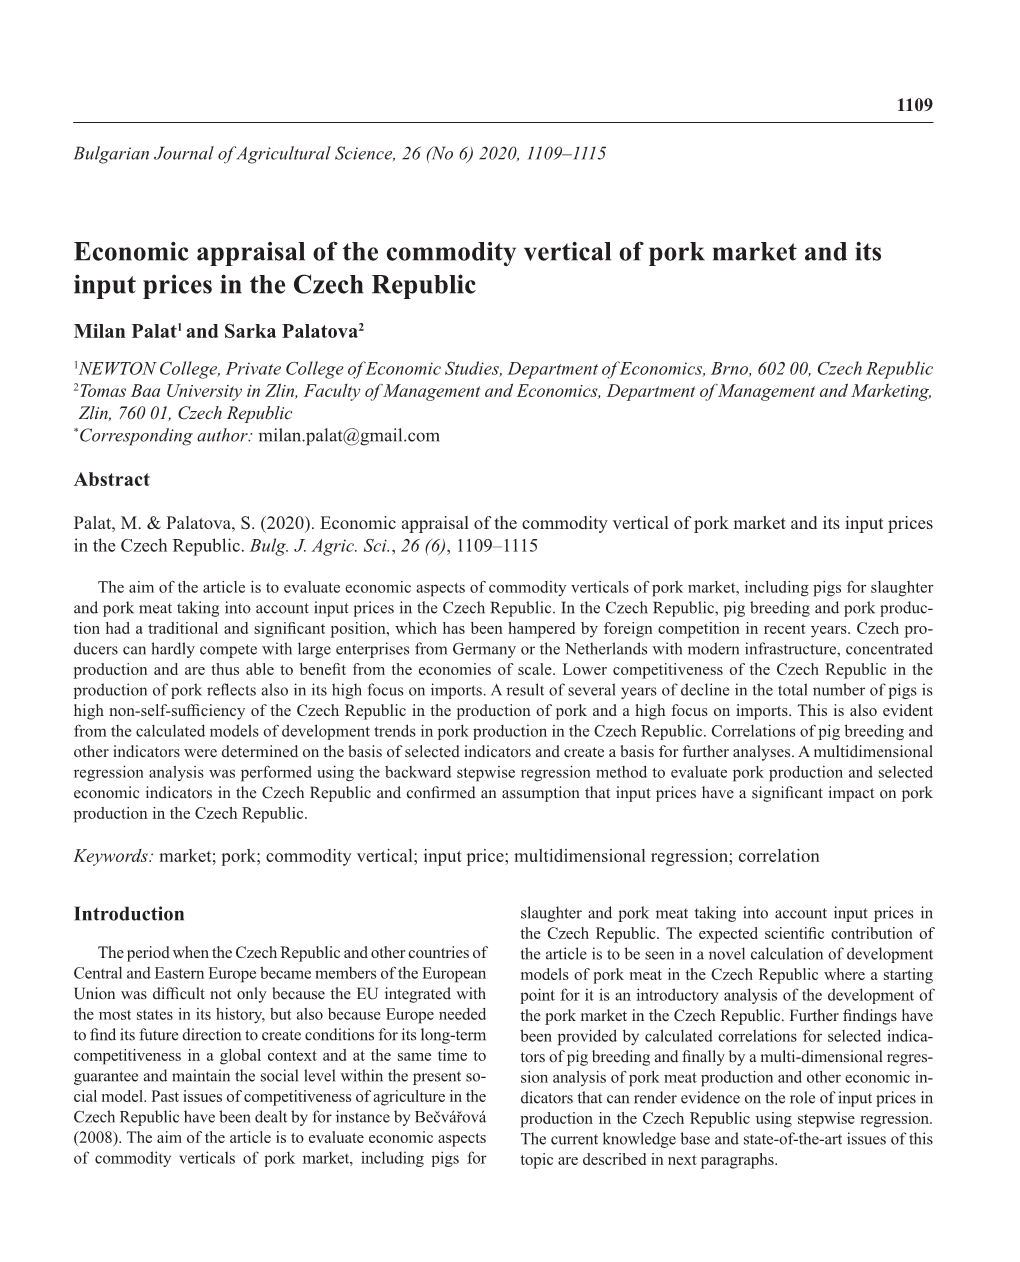 Economic Appraisal of the Commodity Vertical of Pork Market and Its Input Prices in the Czech Republic